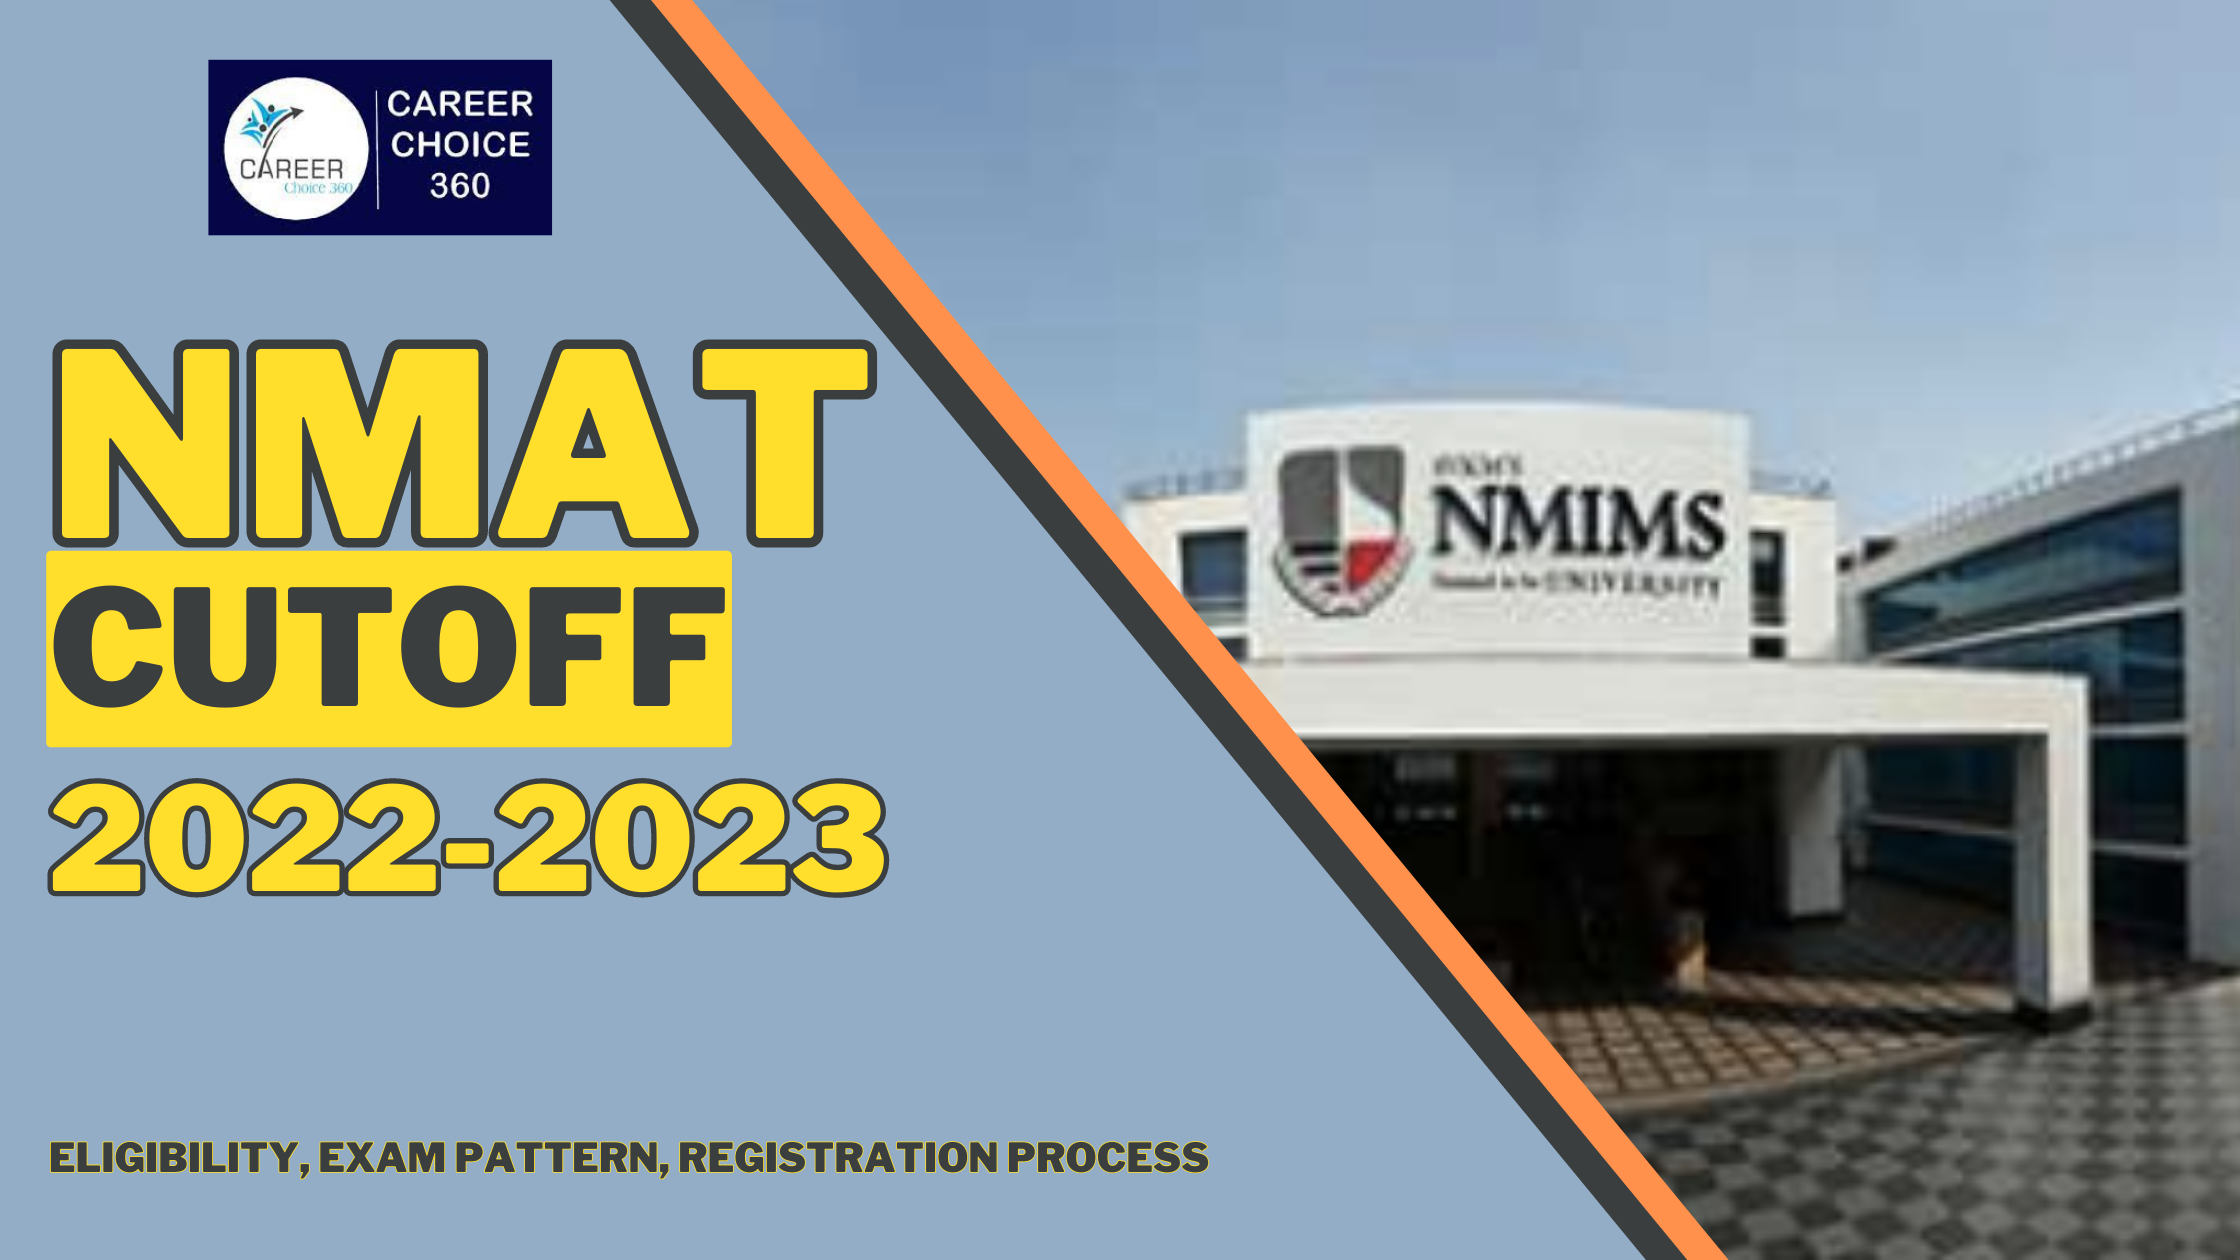 You are currently viewing NMAT Exam 2022: All About the NMAT Cutoff 2022-2023